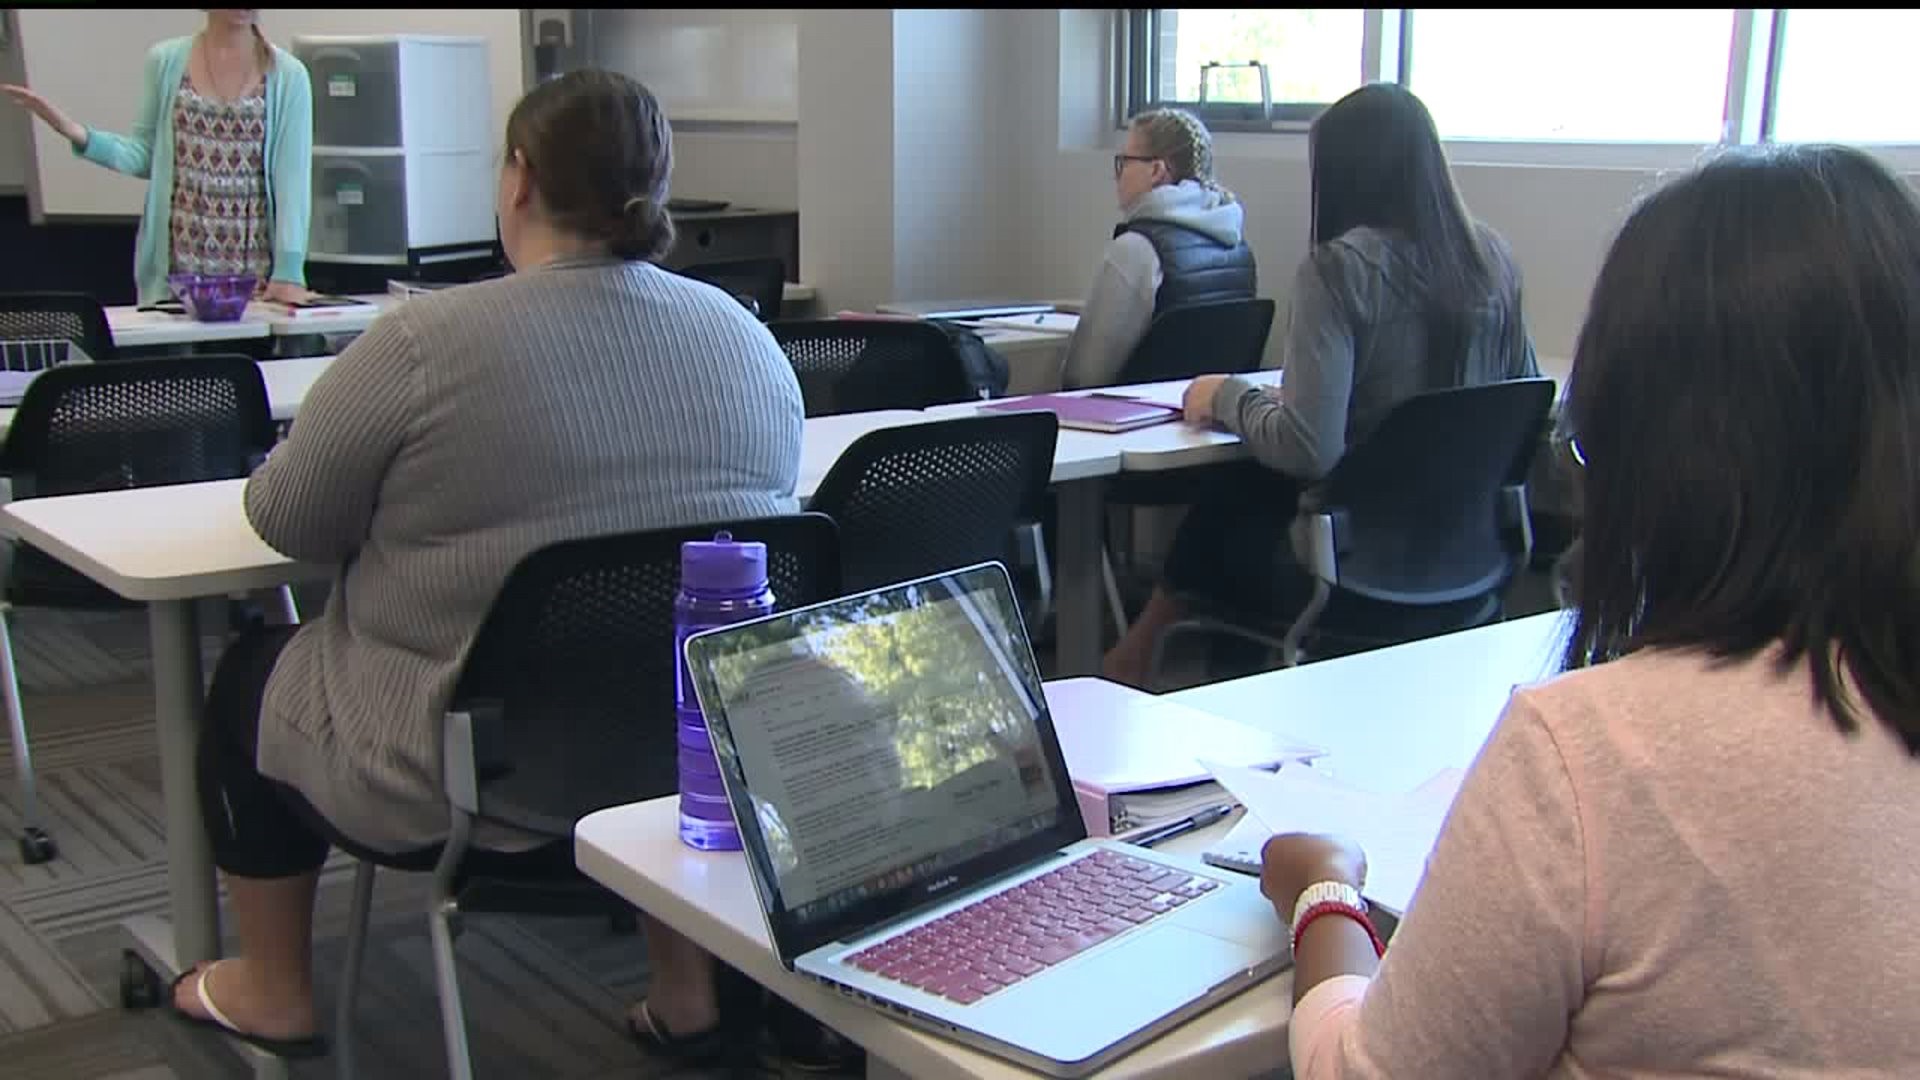 Western Illinois University to receive funding for improvements